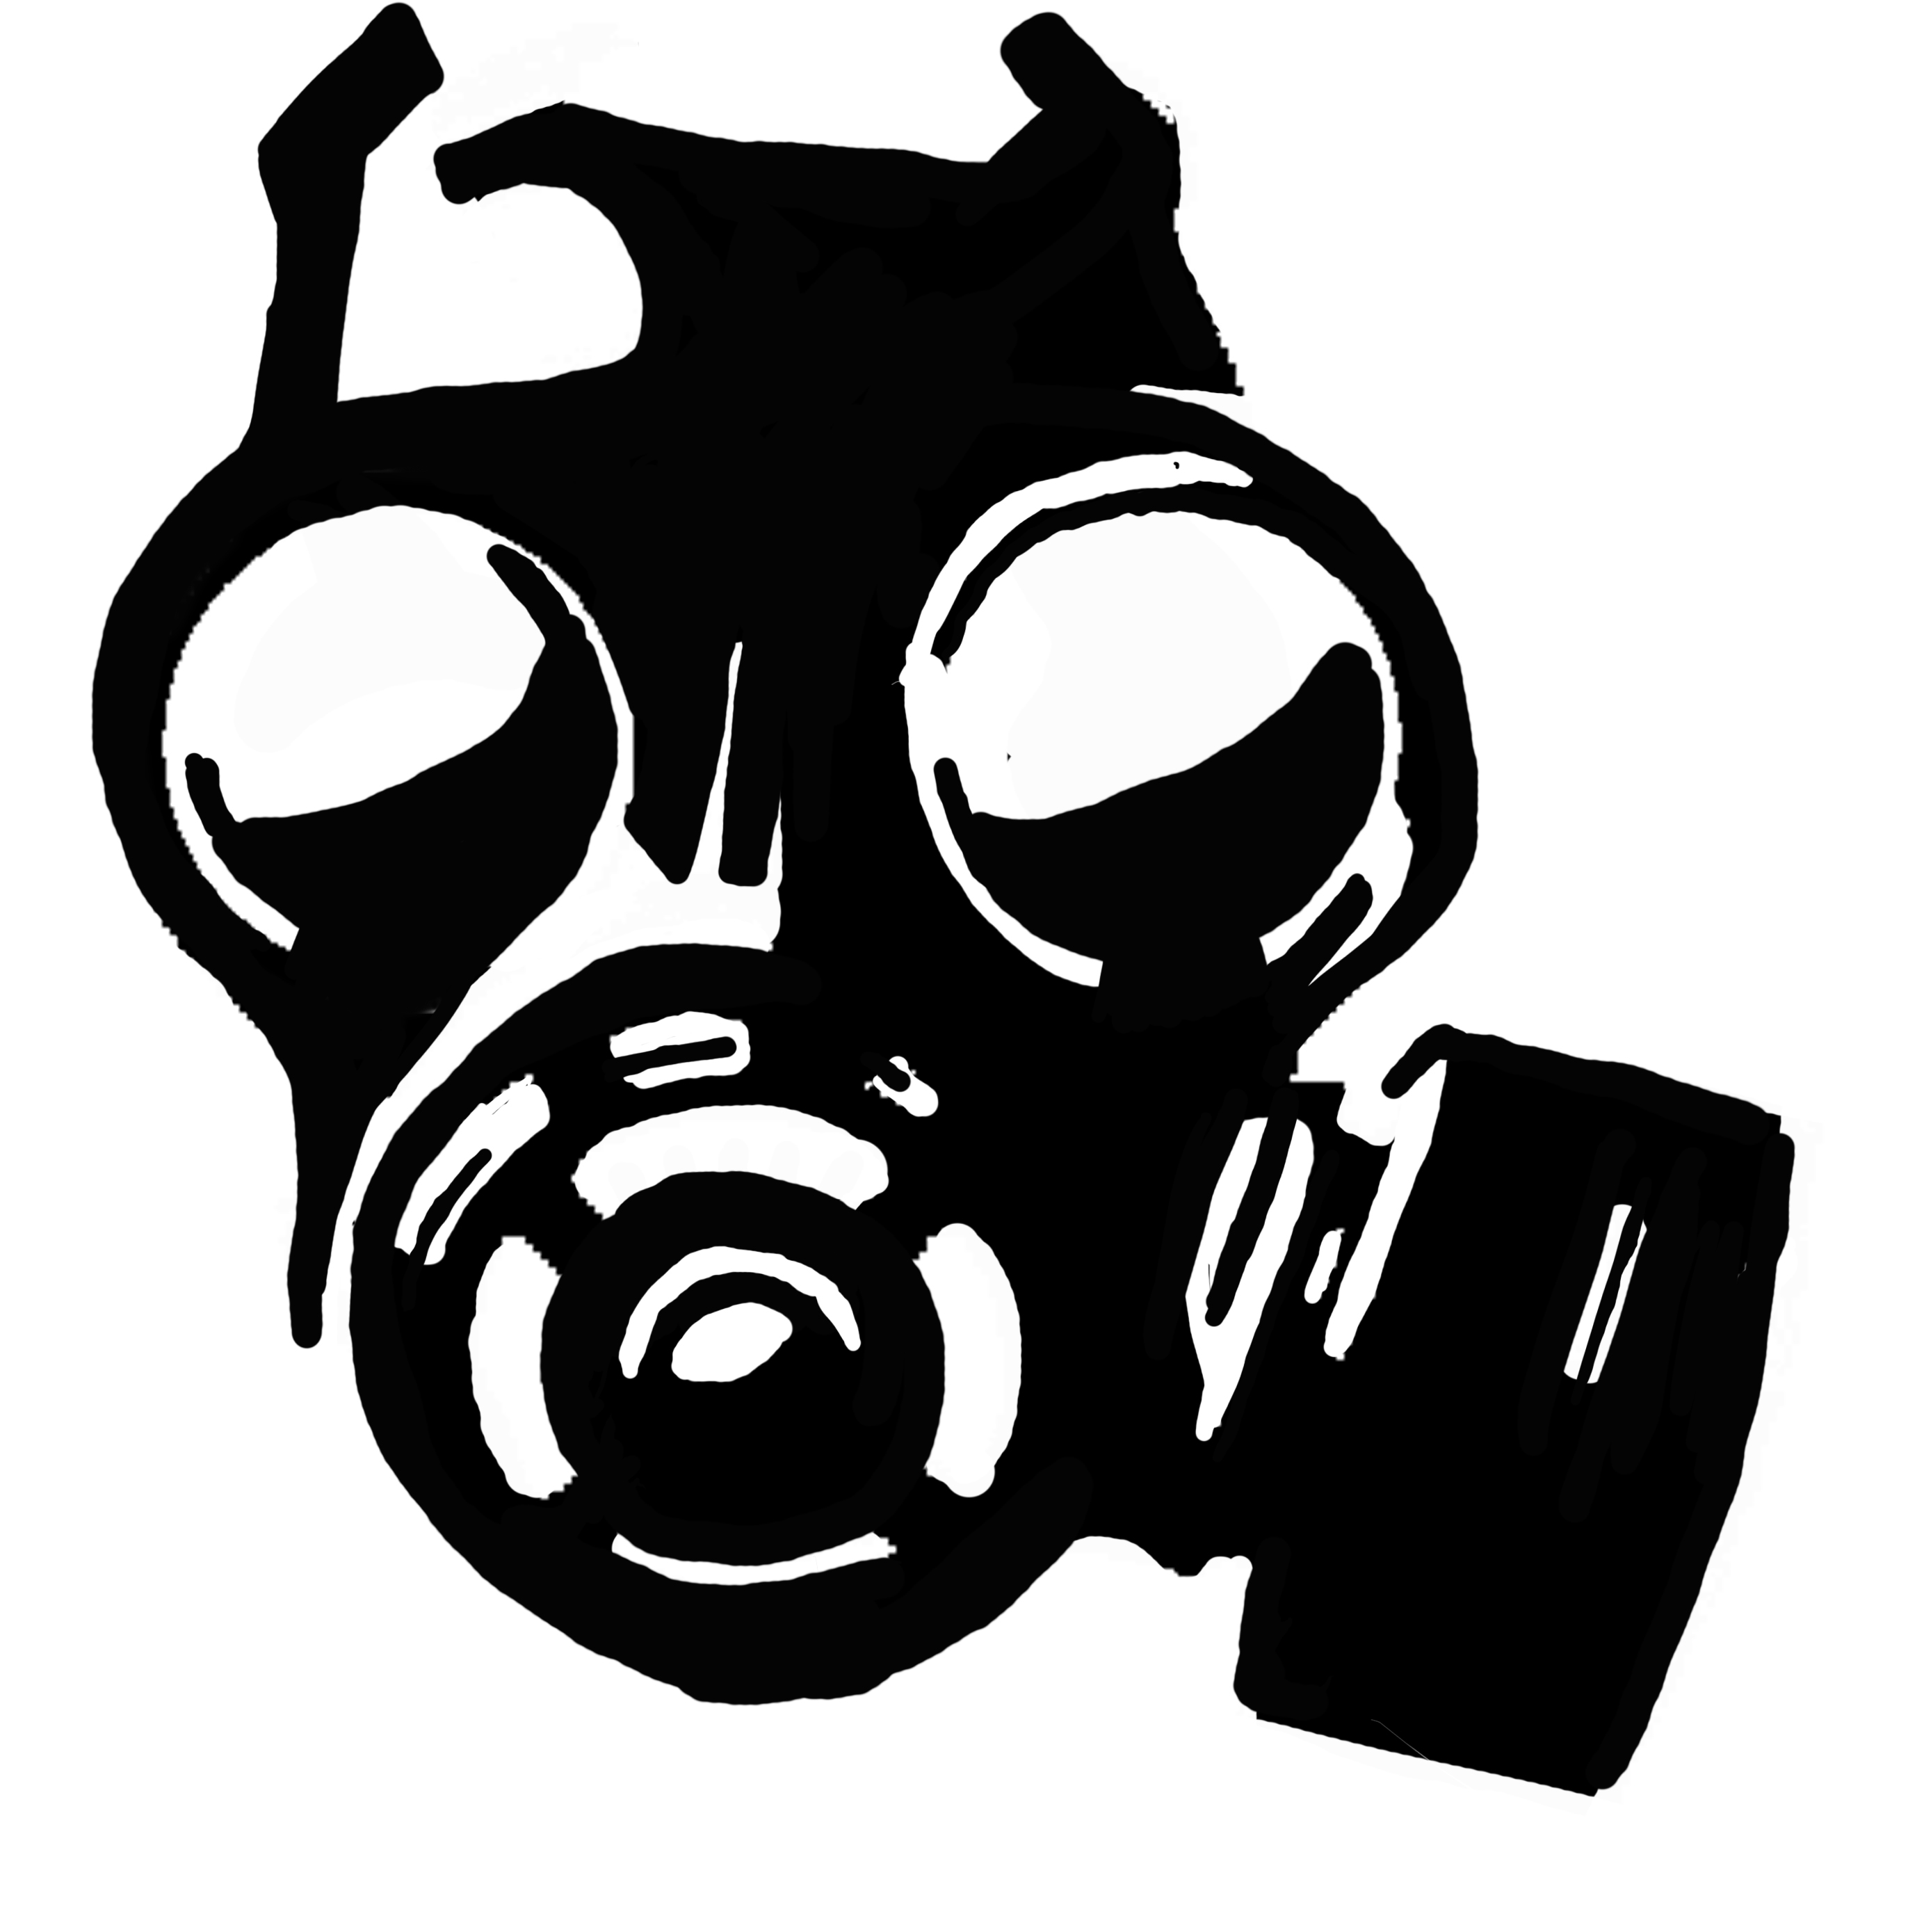 Gas Mask Clip Art At Clker Co